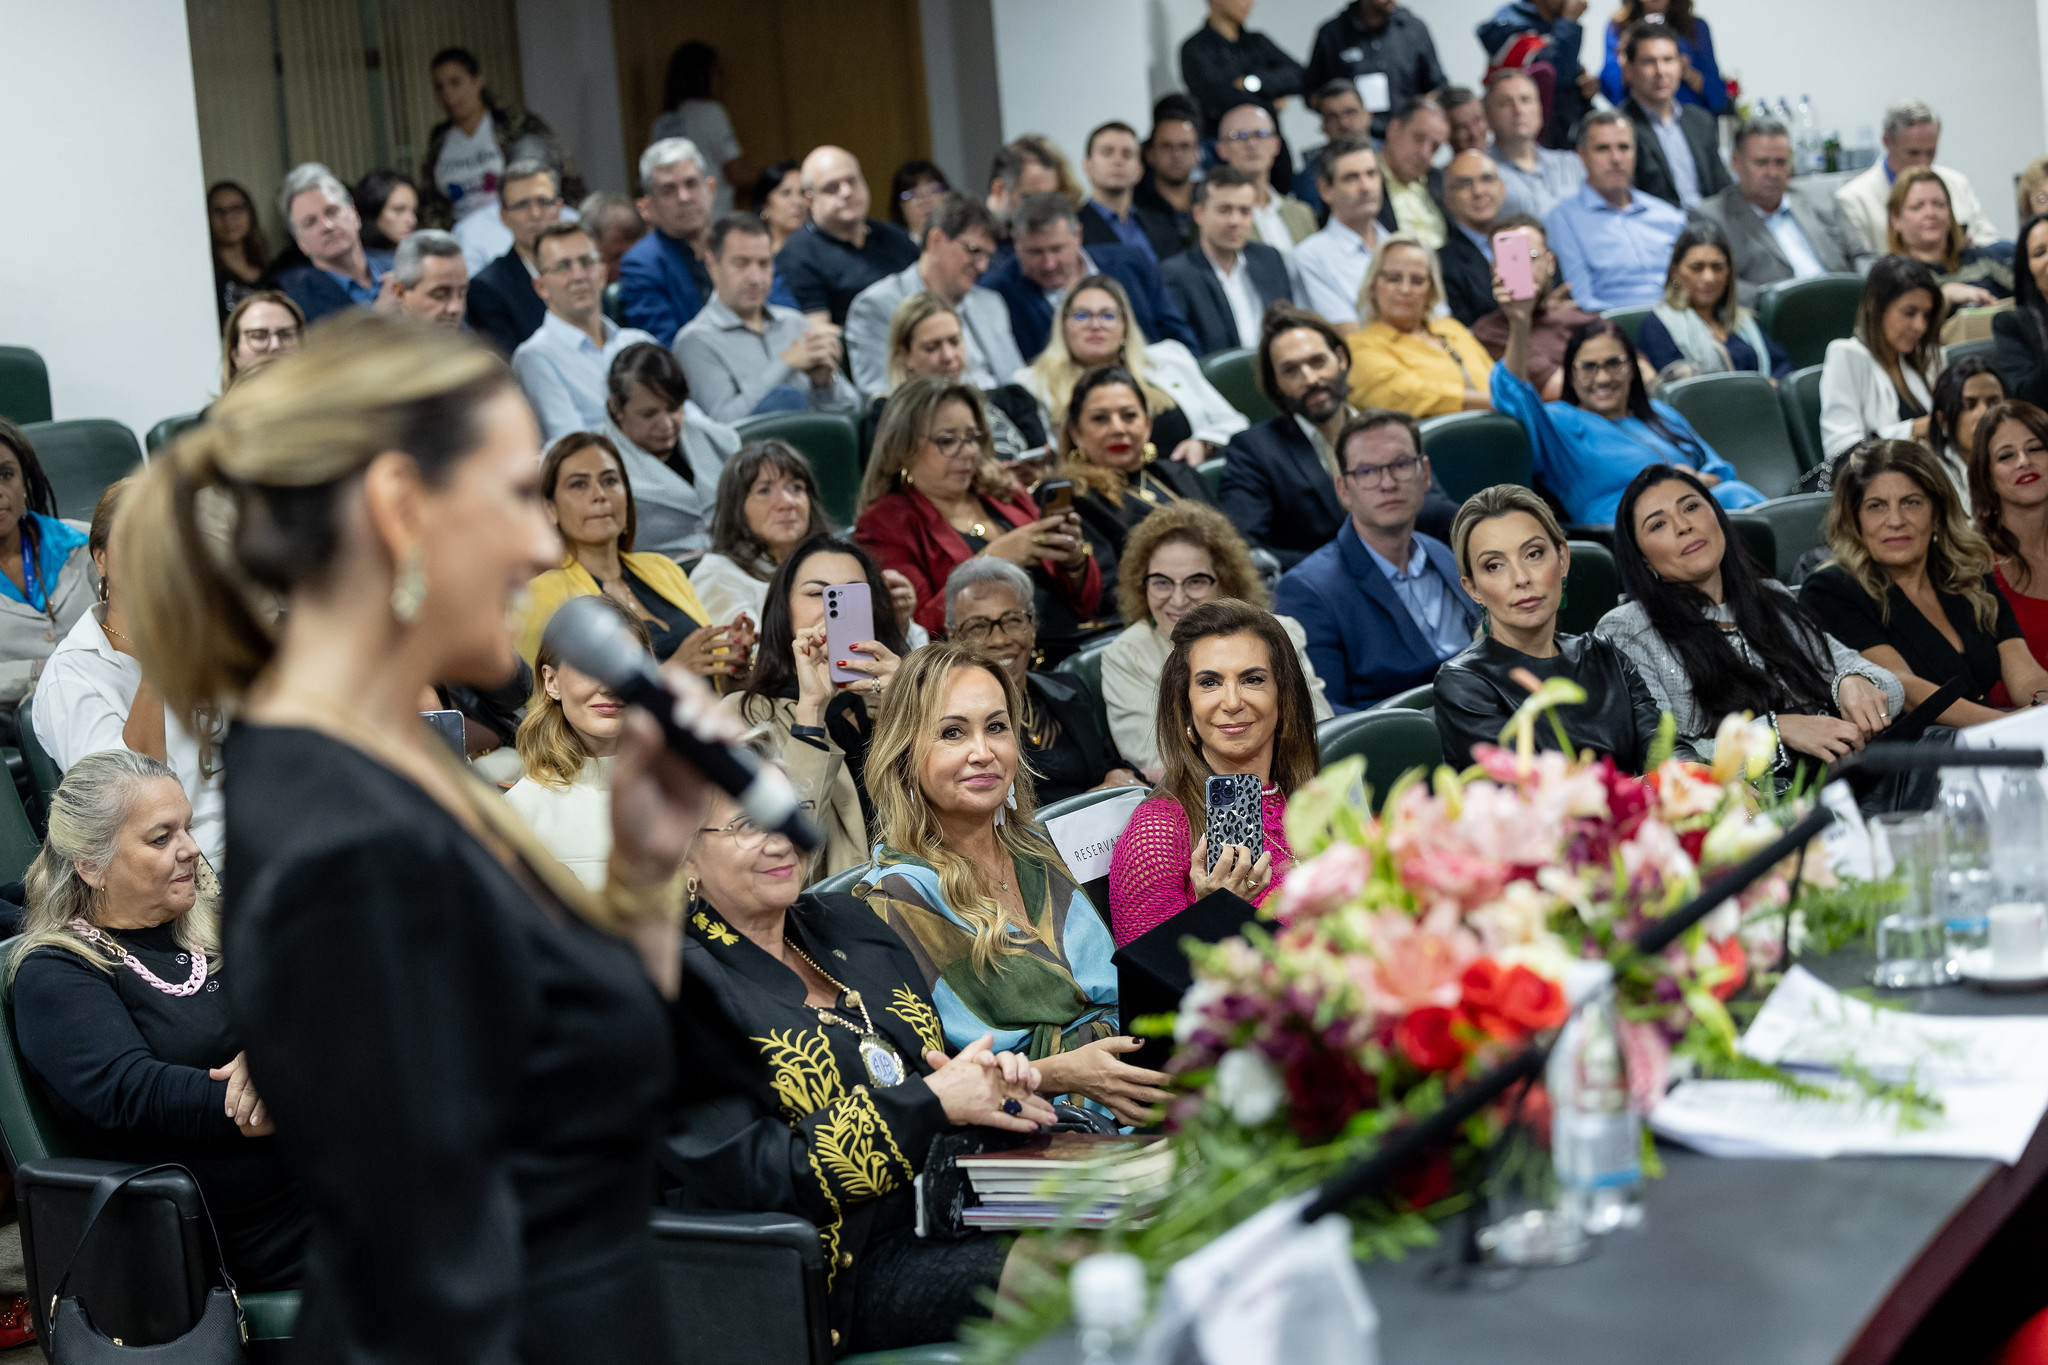 1 edio Prmio Mulheres Notveis<a style='float:right' href='https://www3.al.sp.gov.br/repositorio/noticia/N-03-2024/fg321487.jpg' target=_blank><img src='/_img/material-file-download-white.png' width='14px' alt='Clique para baixar a imagem'></a>